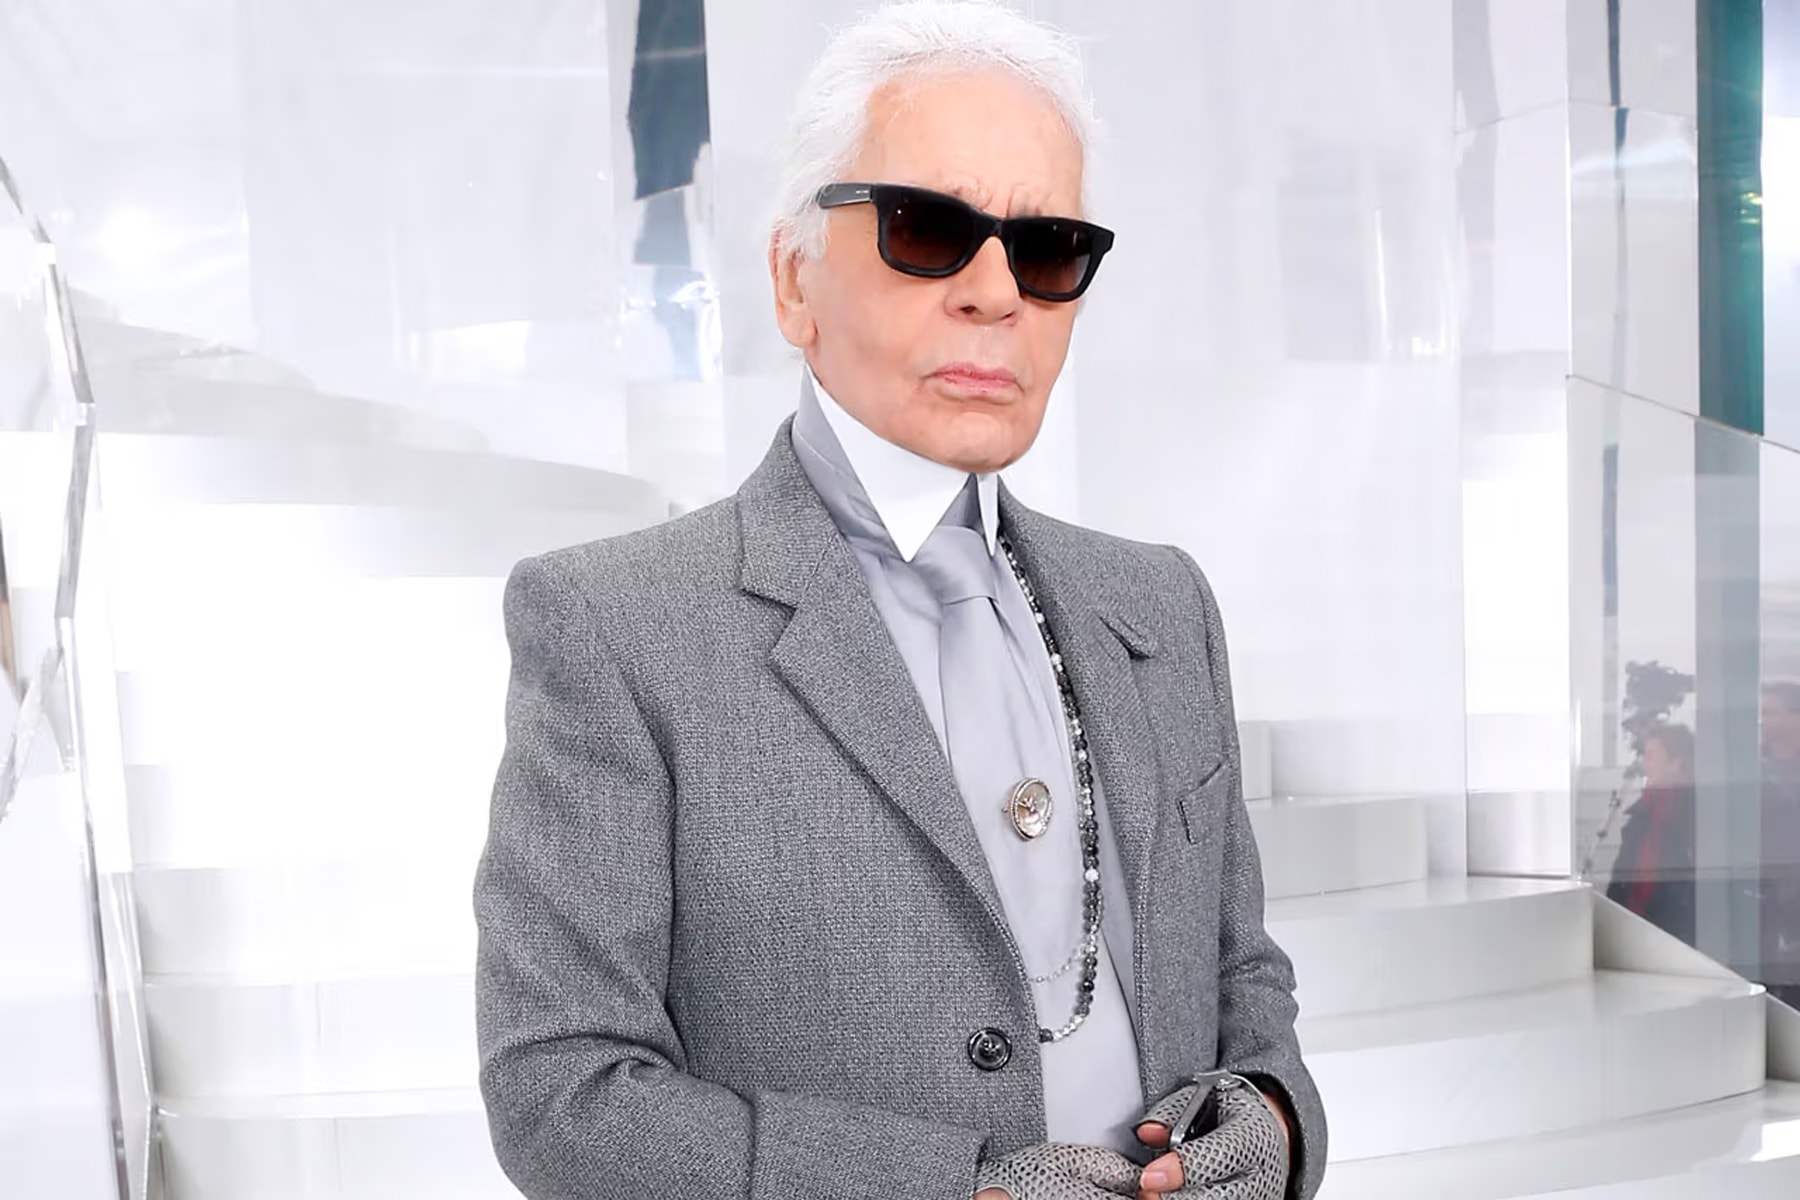 Karl Lagerfeld 设计之 CHANEL Haute Couture 系列服饰即将展开拍卖